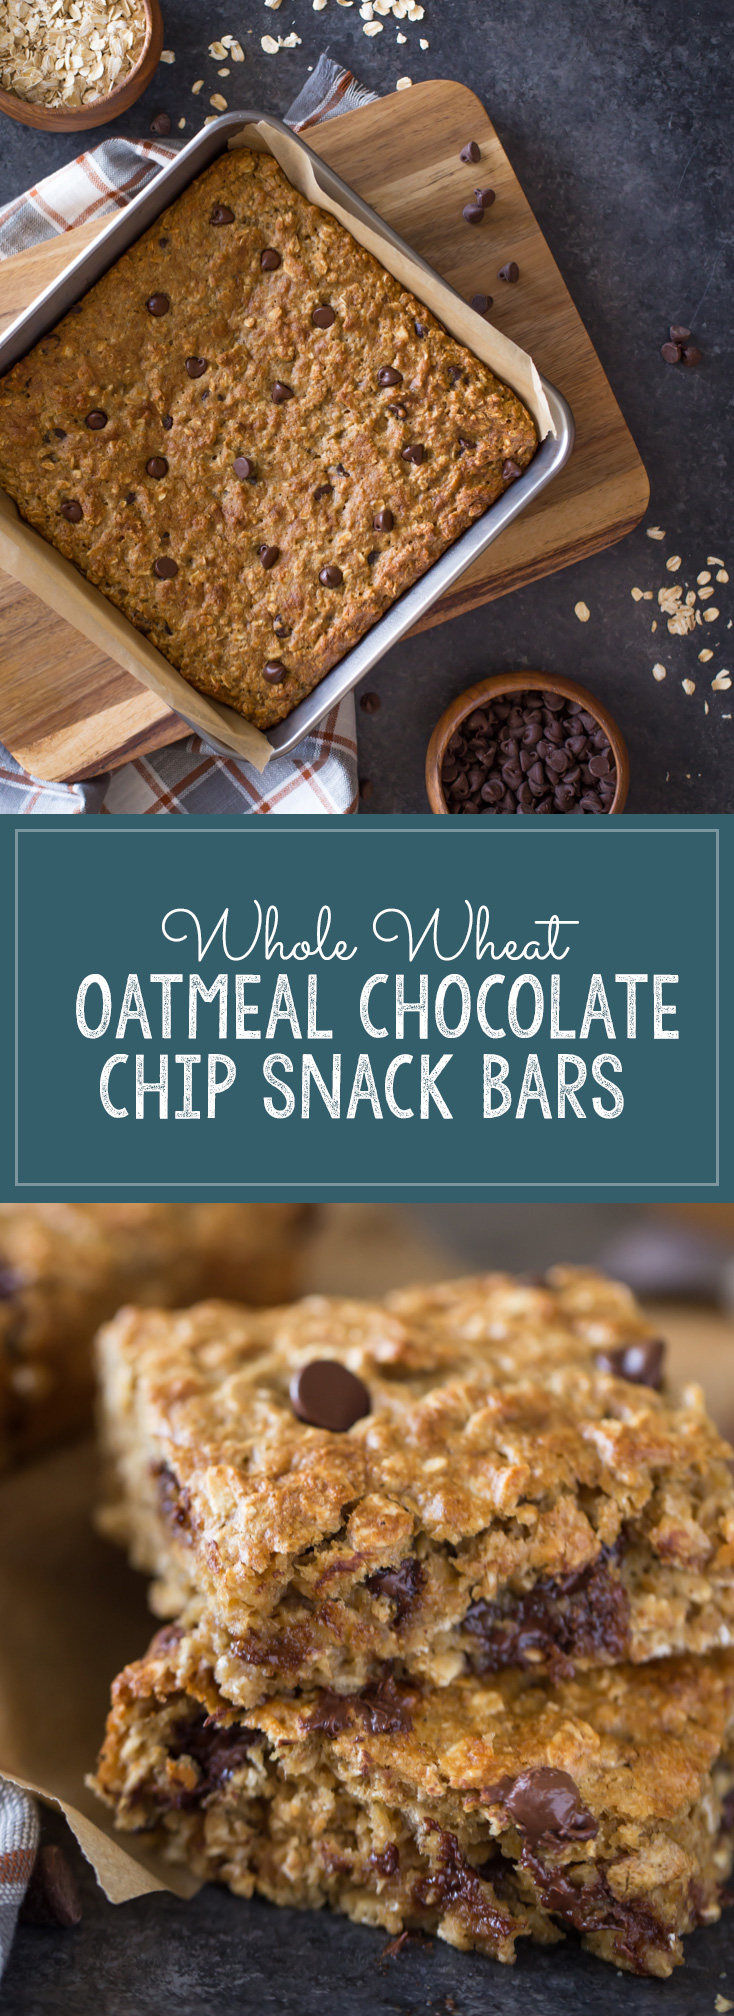 Whole Wheat Oatmeal Chocolate Chip Snack Bars - Lovely Little Kitchen